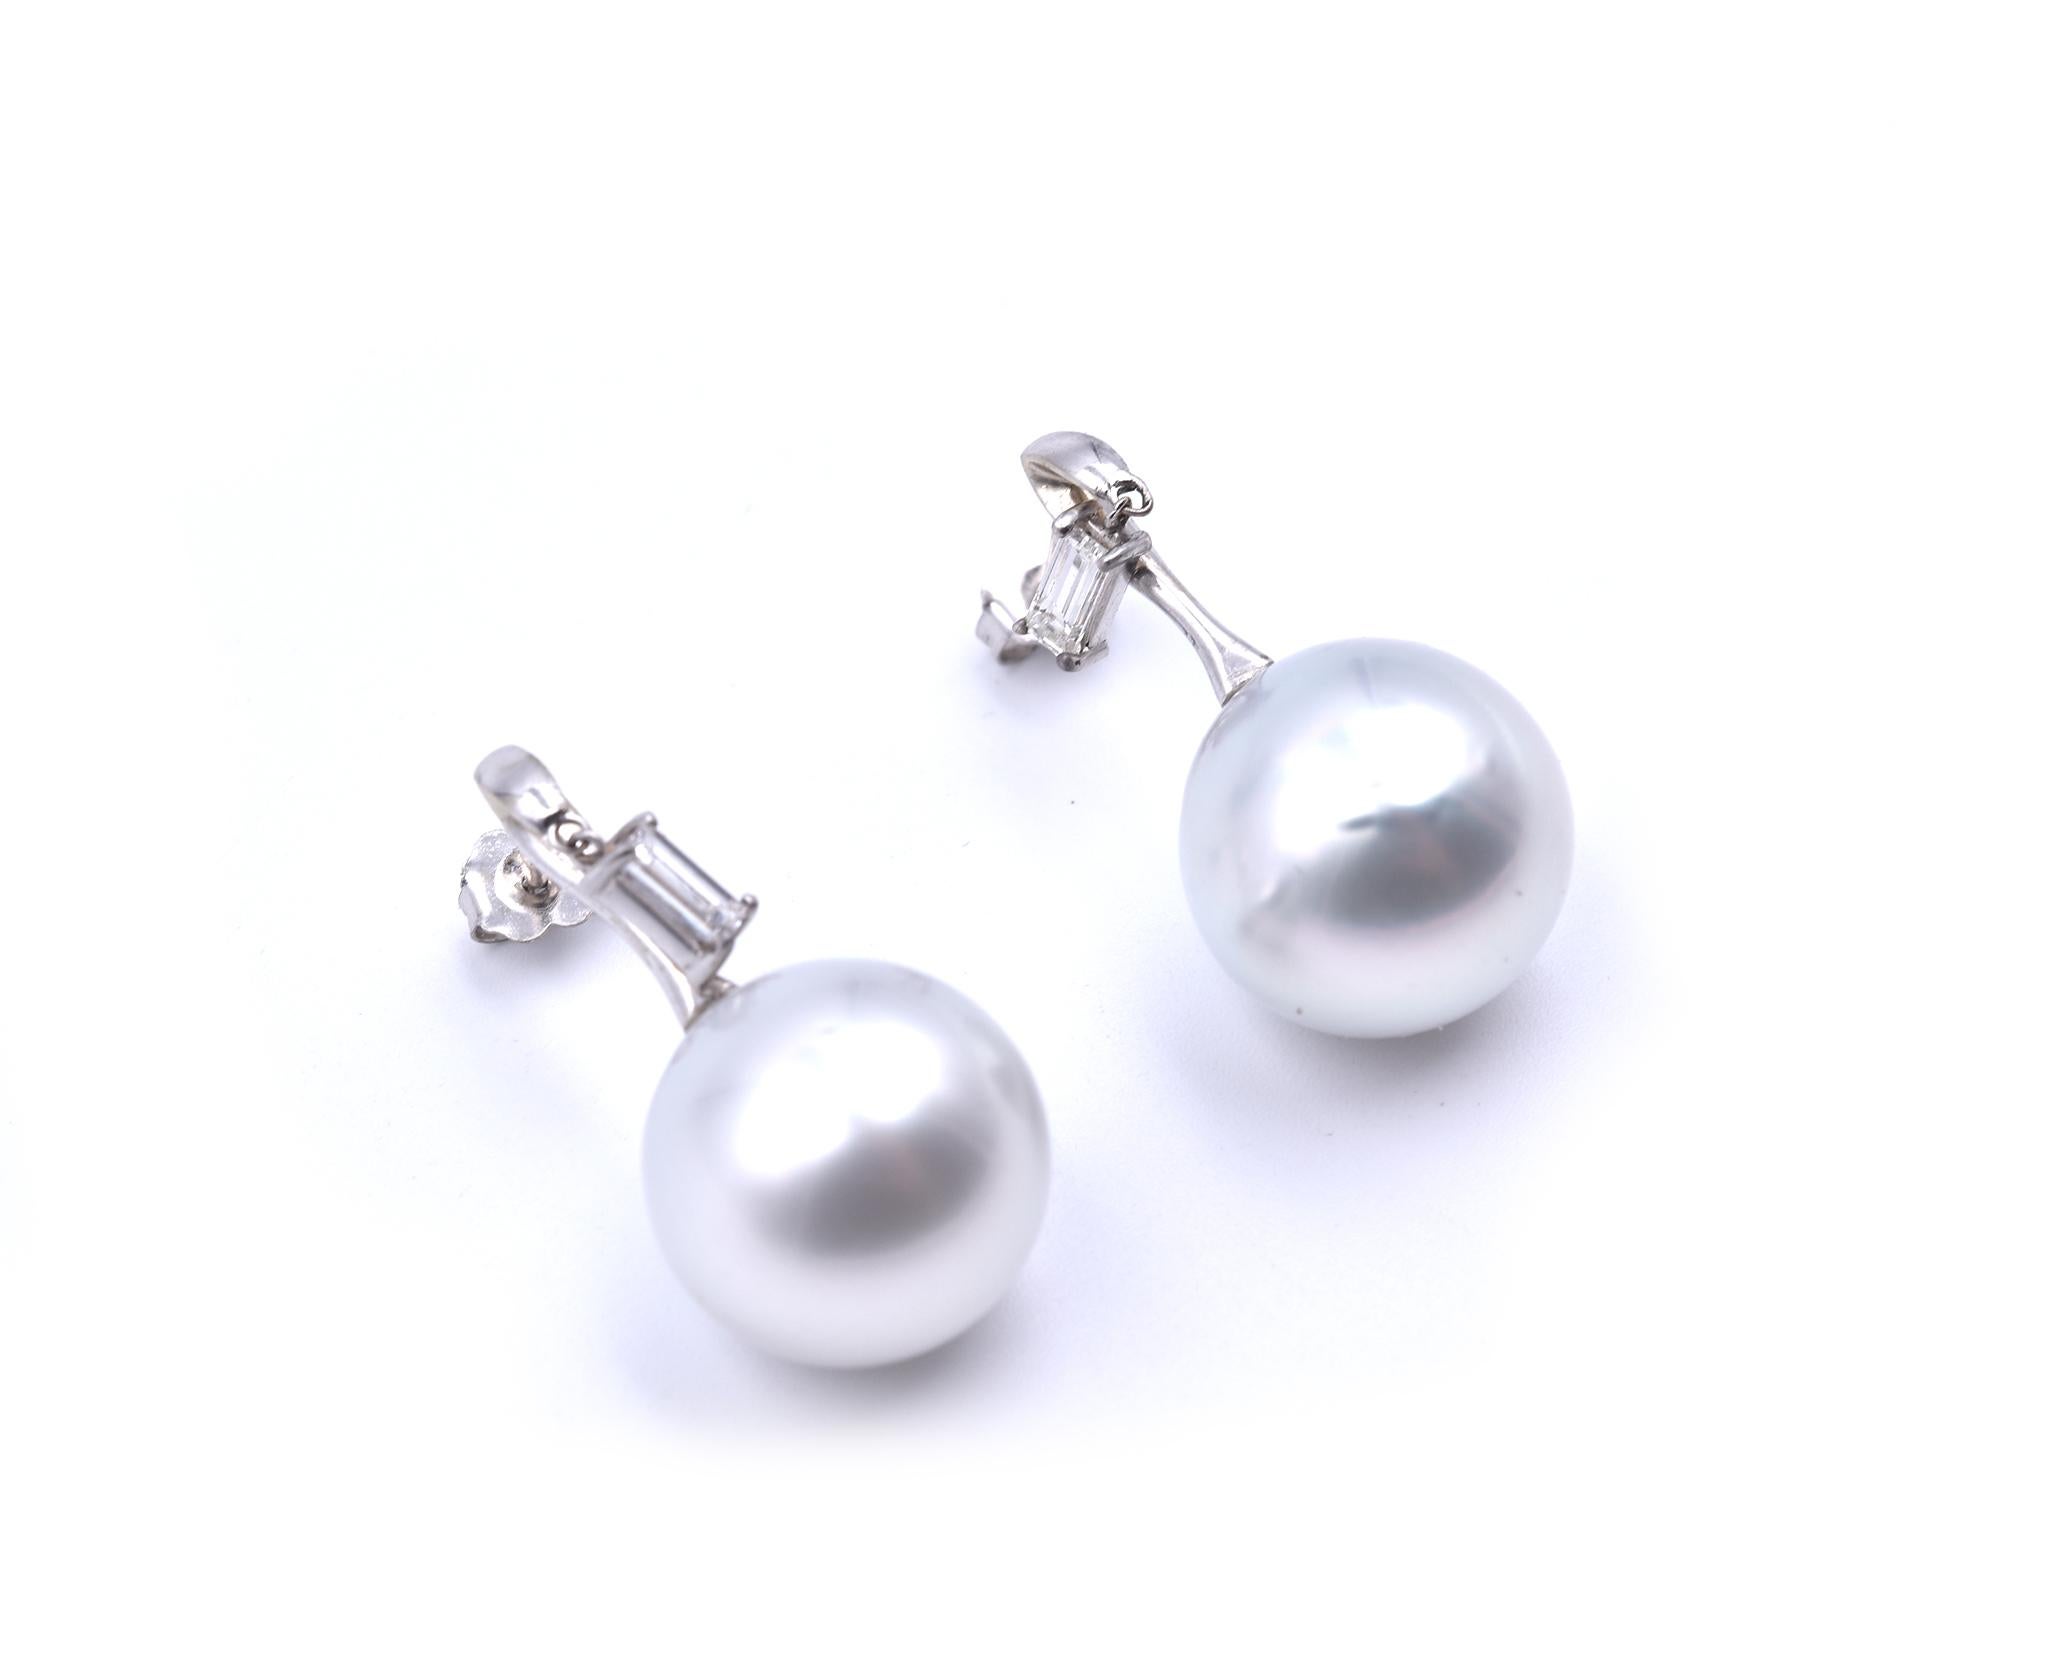 Designer: custom design
Material: 18k white gold
Diamonds: 2 emerald cut =.60cttw
Color: G
Clarity: VS
Pearls: South Sea Pearls are approximately 15.47mm in diameter 
Fastenings: post
Dimensions: each earring is approximately 29.65mm long
Weight: